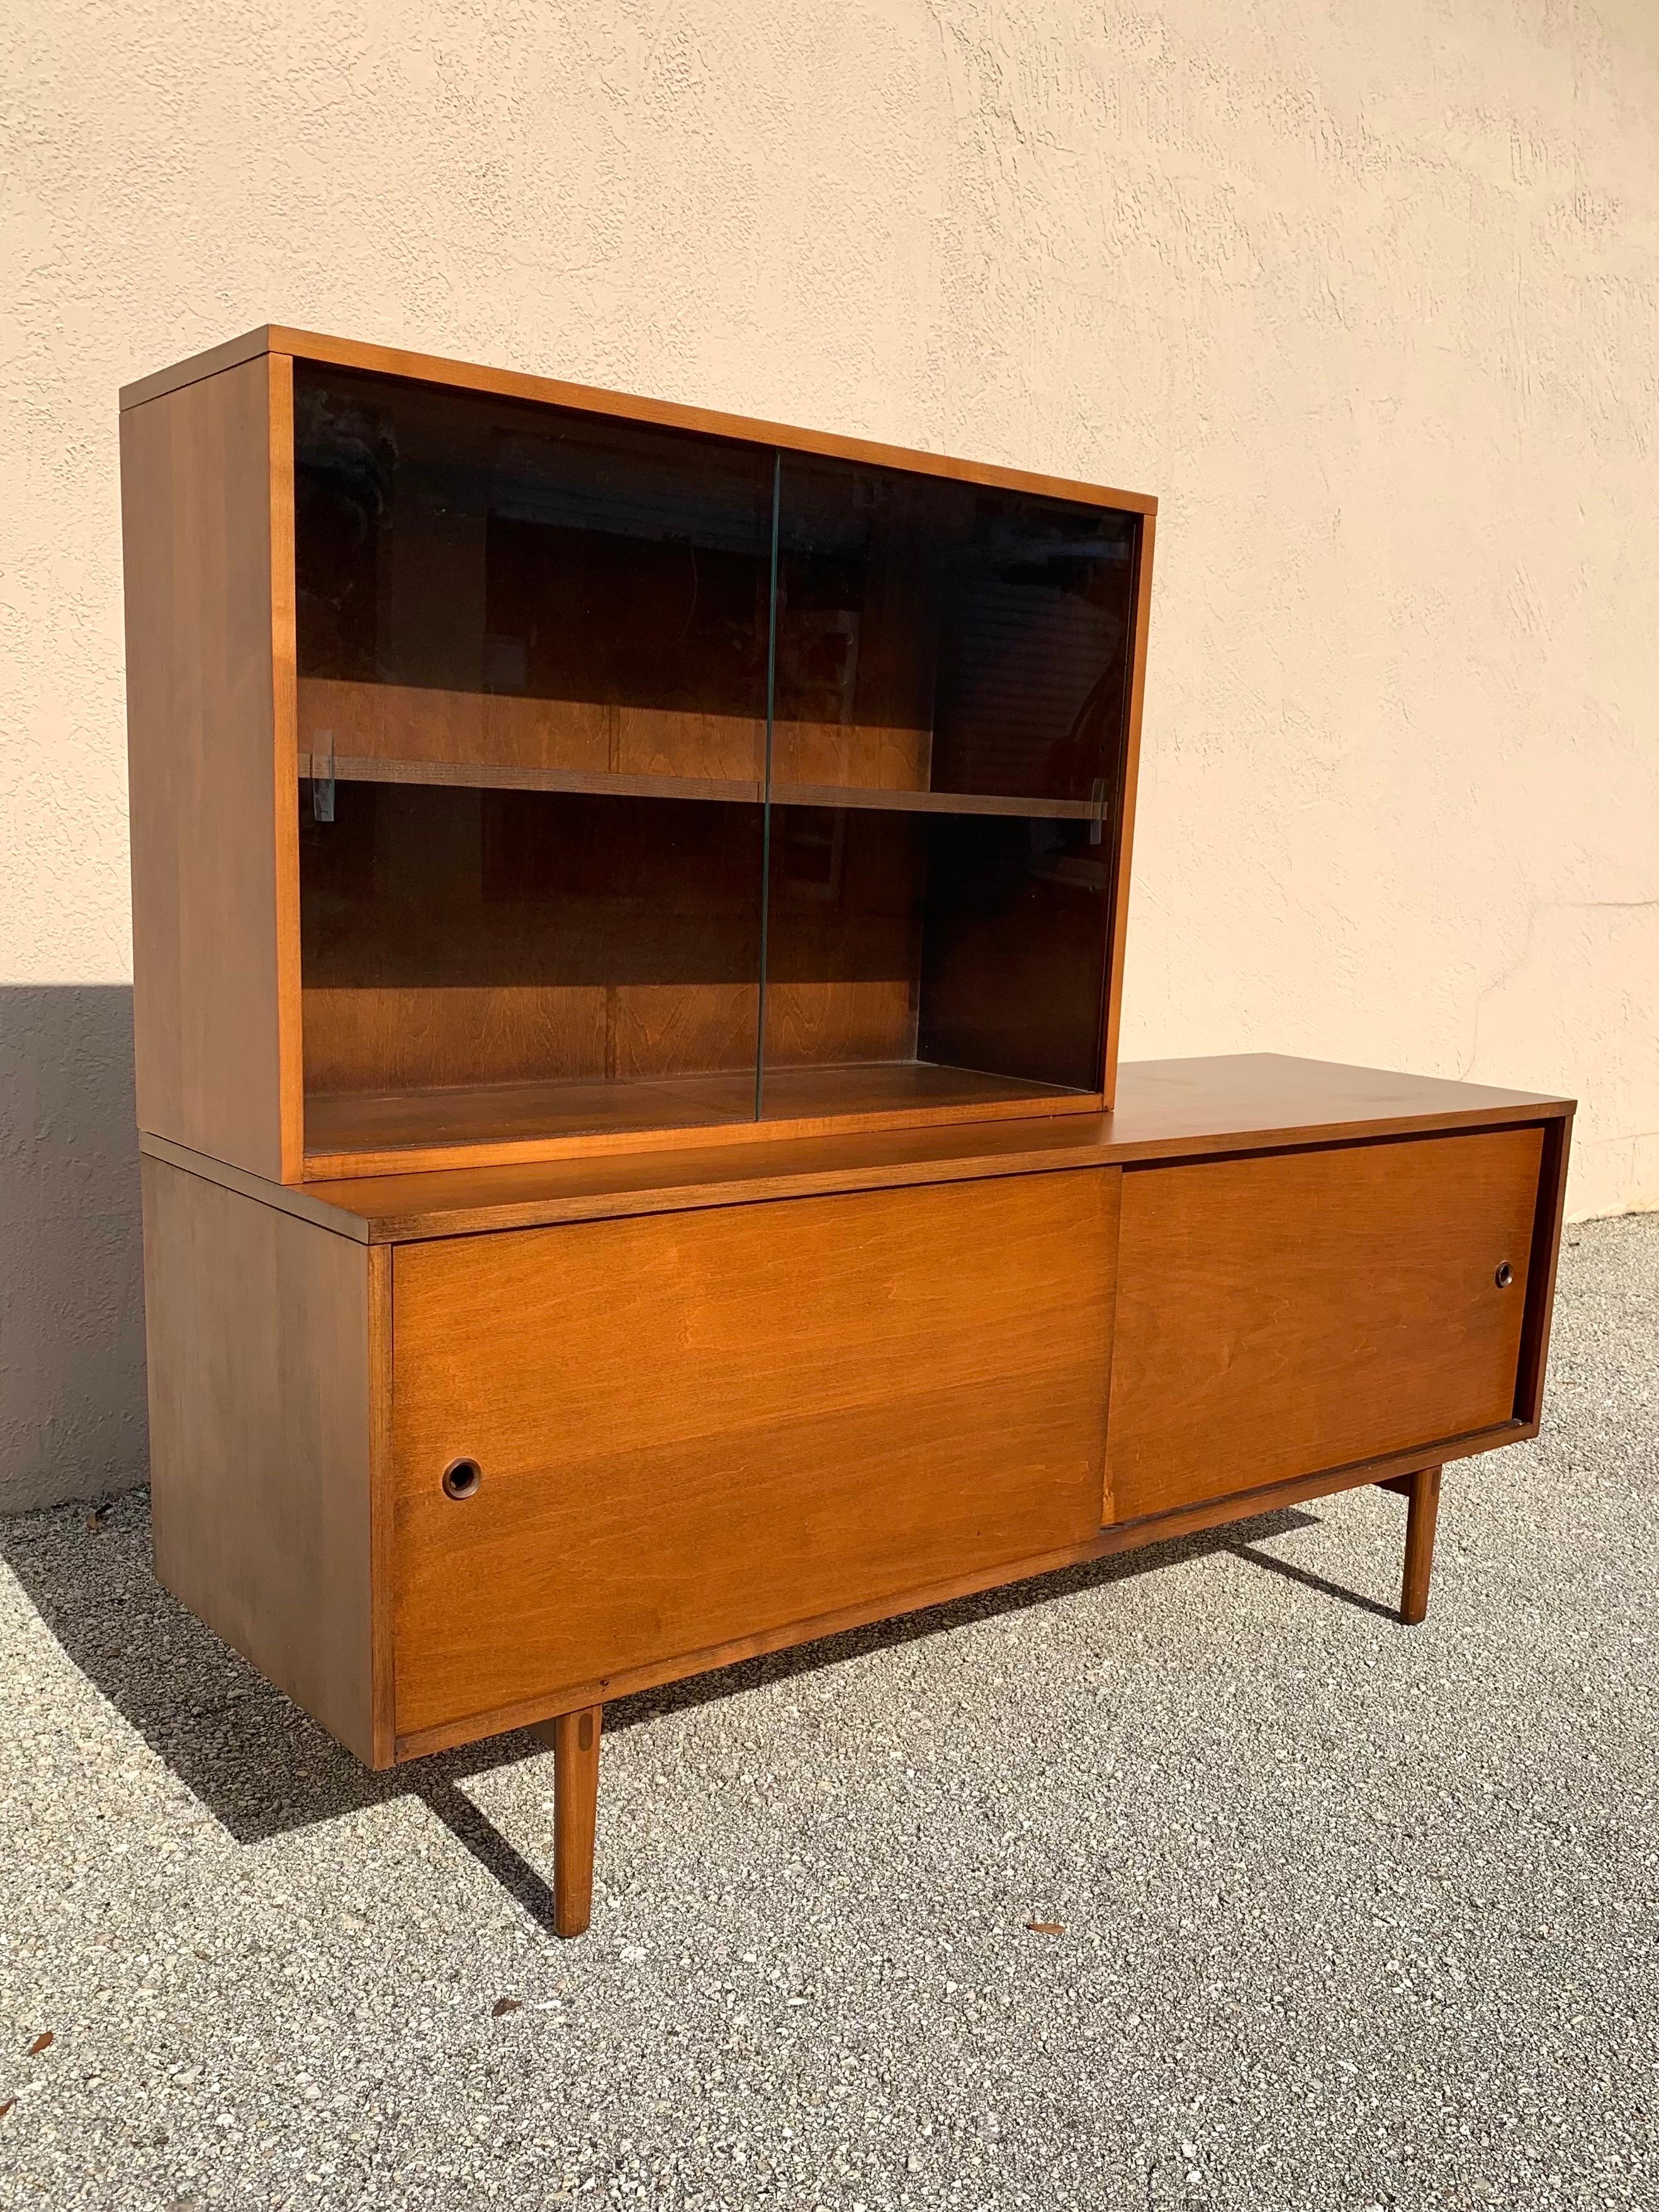 Time capsule condition low credenza/hutch by Paul McCobb for The Planner Group. Model #1513. Mostly solid wood construction with some veneer on the trim. A nice rich walnut finish. This is a rare version with the hutch top and rarely seen legs.